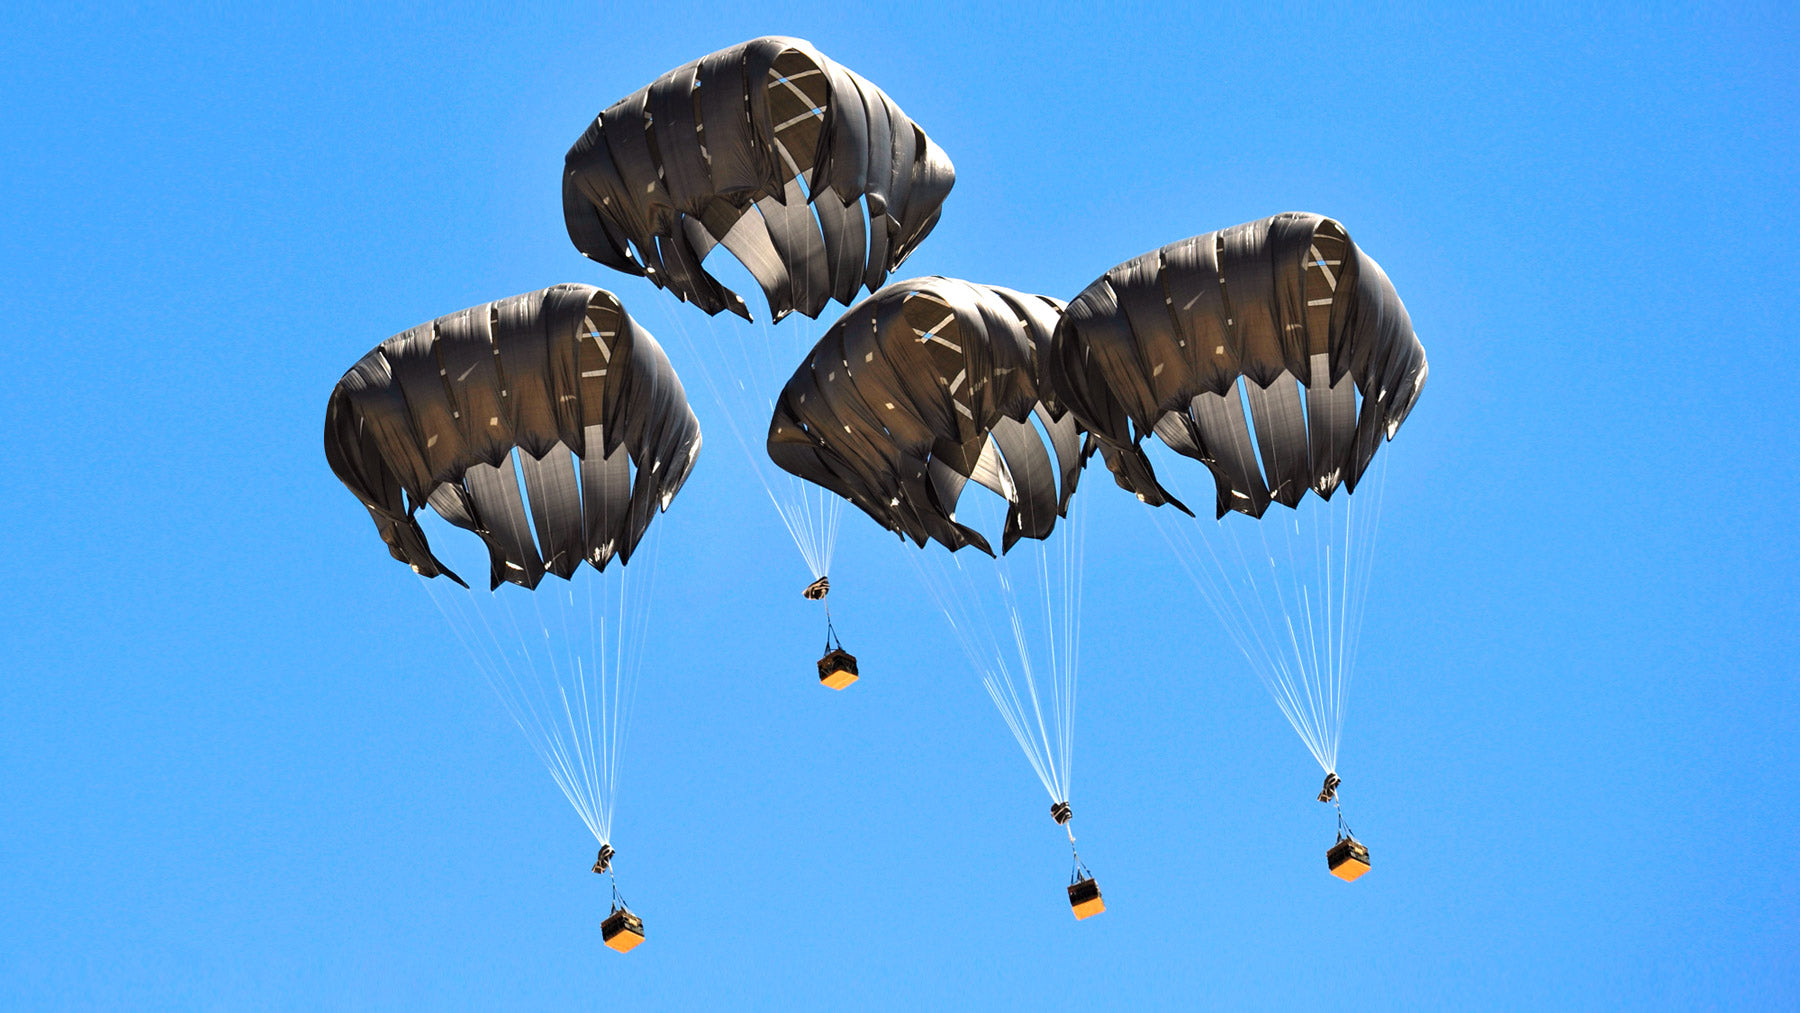 Low Velocity Parachutes fully deployed each carrying individual payloads. Manufactured by Niche Inc